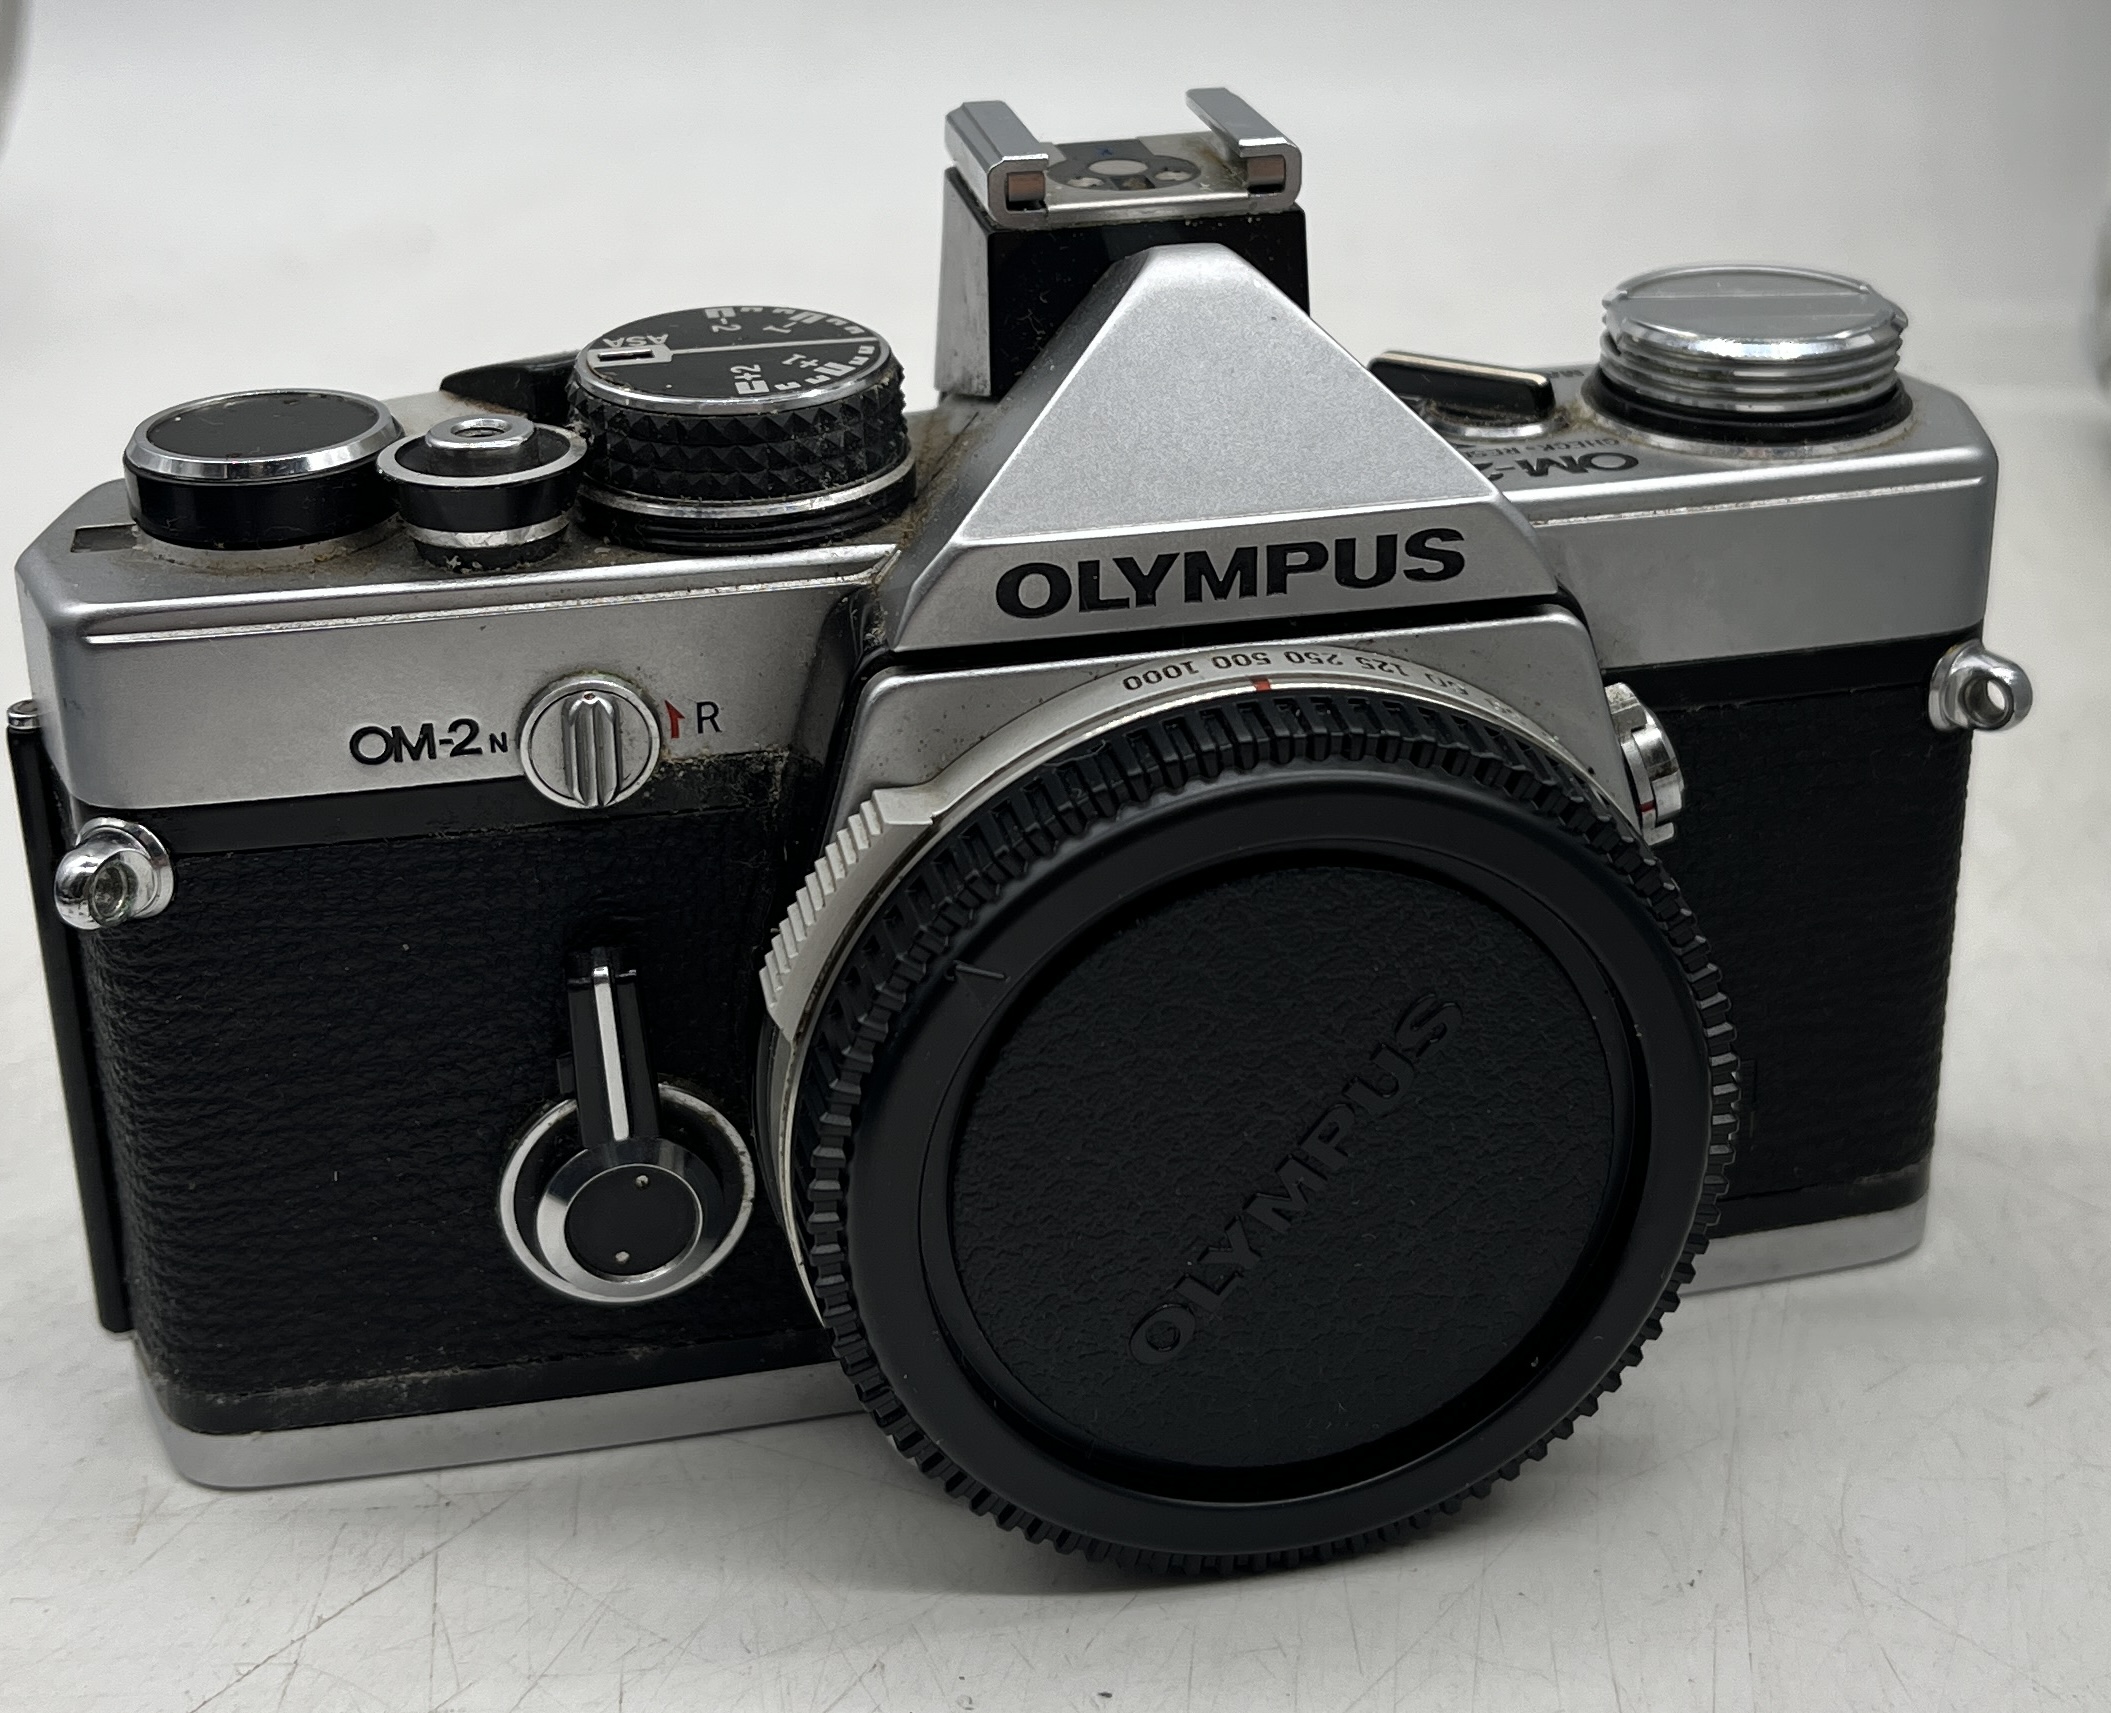 A cased collection of cameras, lenses and accessories including Olympus OM-2, Olympus OM-4 etc. - Image 3 of 7